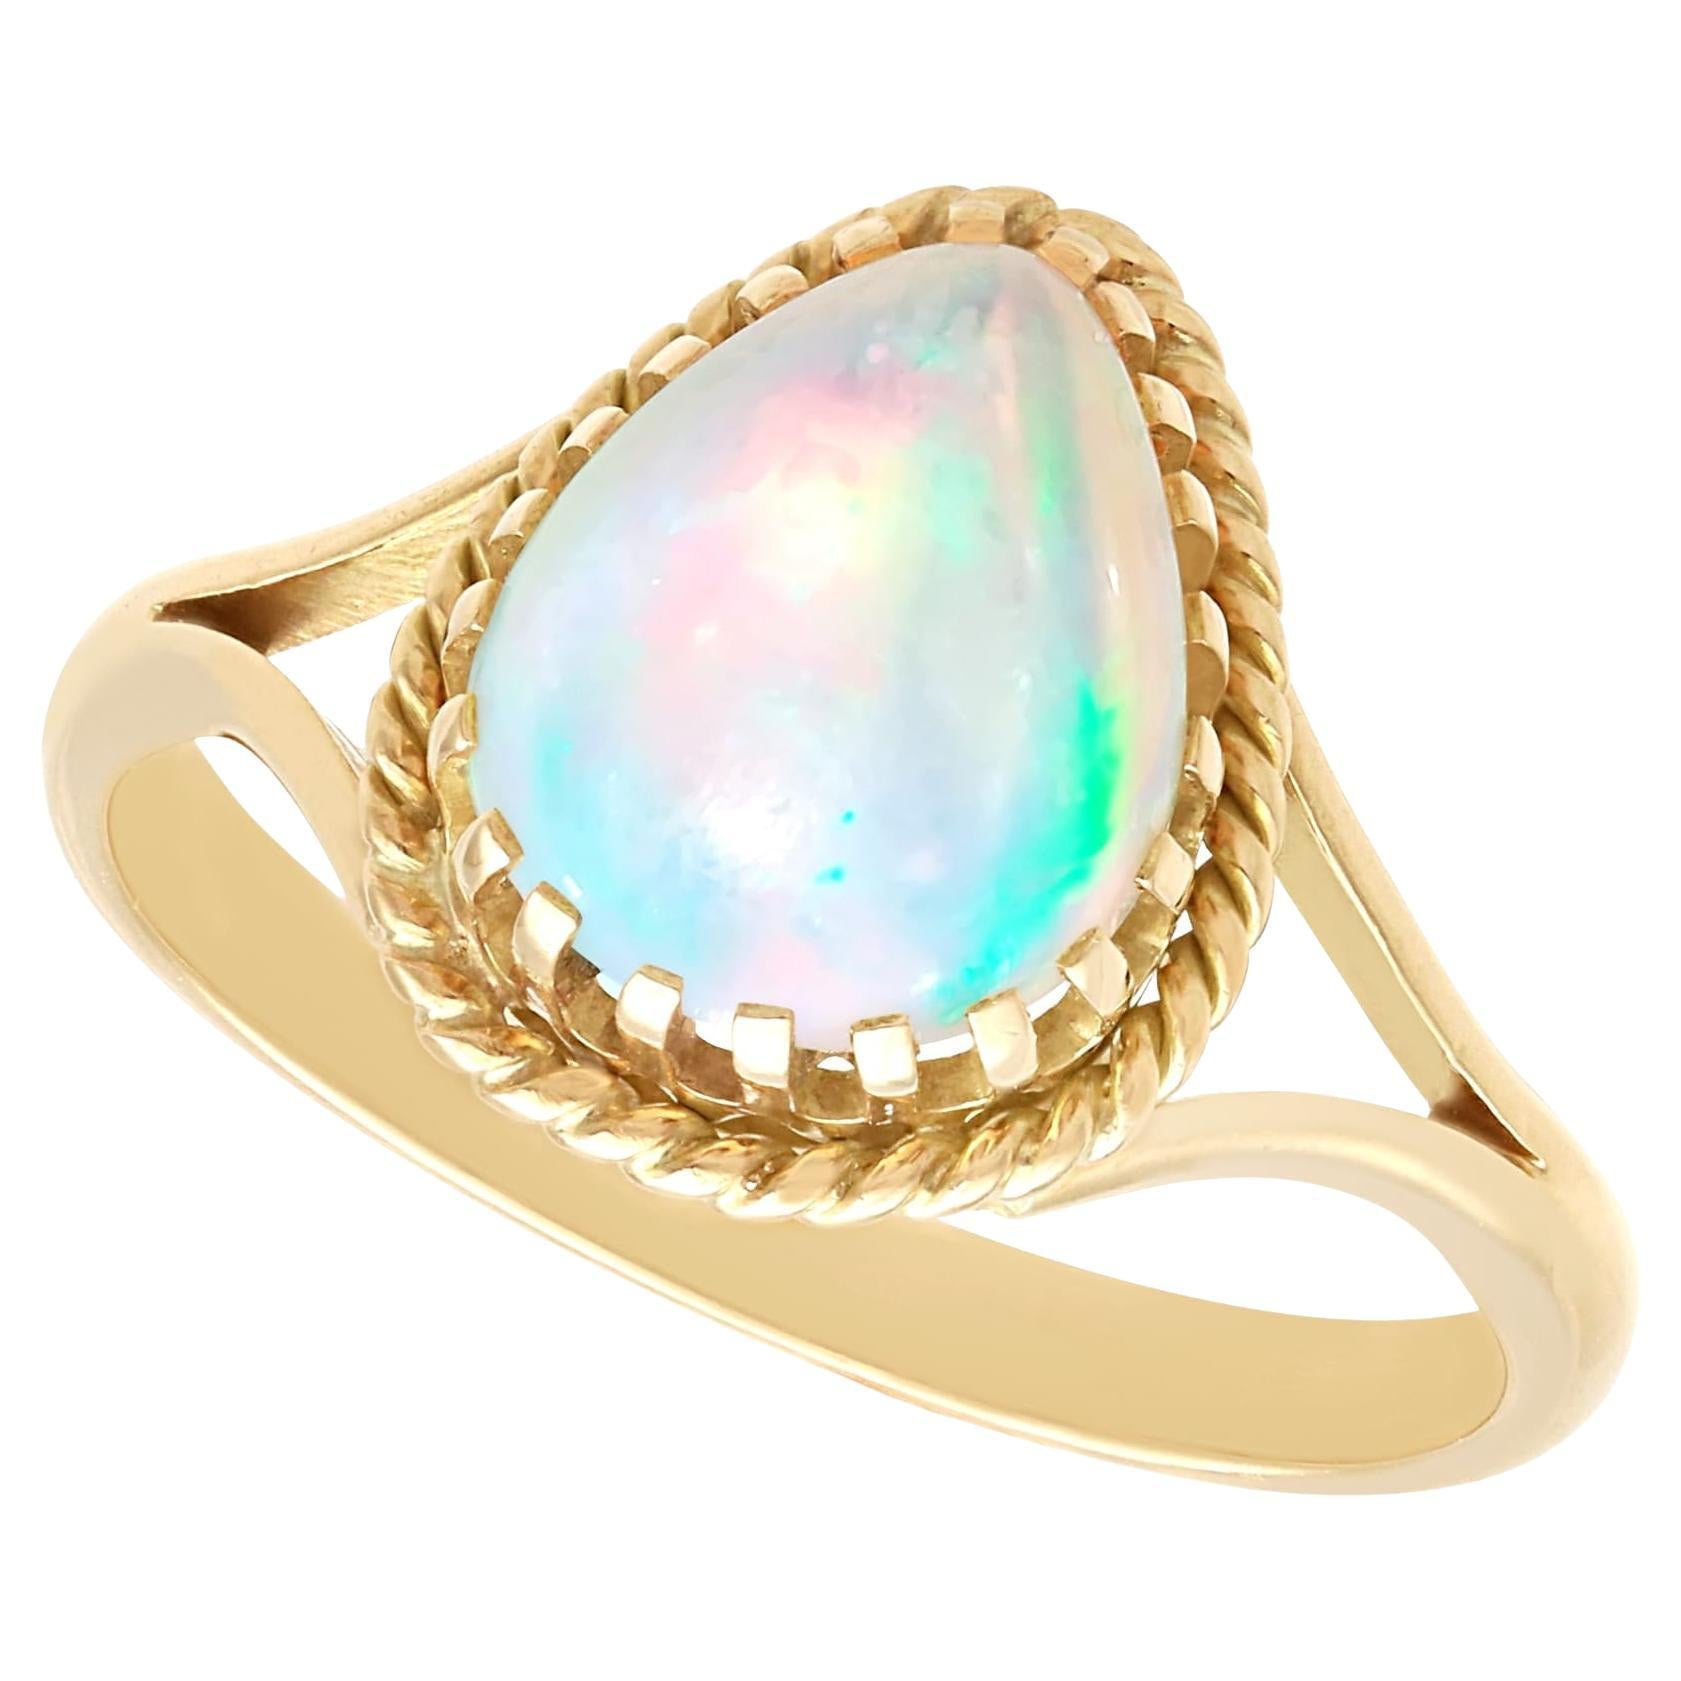 Vintage 1.80ct Opal and 9k Yellow Gold Ring Circa 1950 For Sale